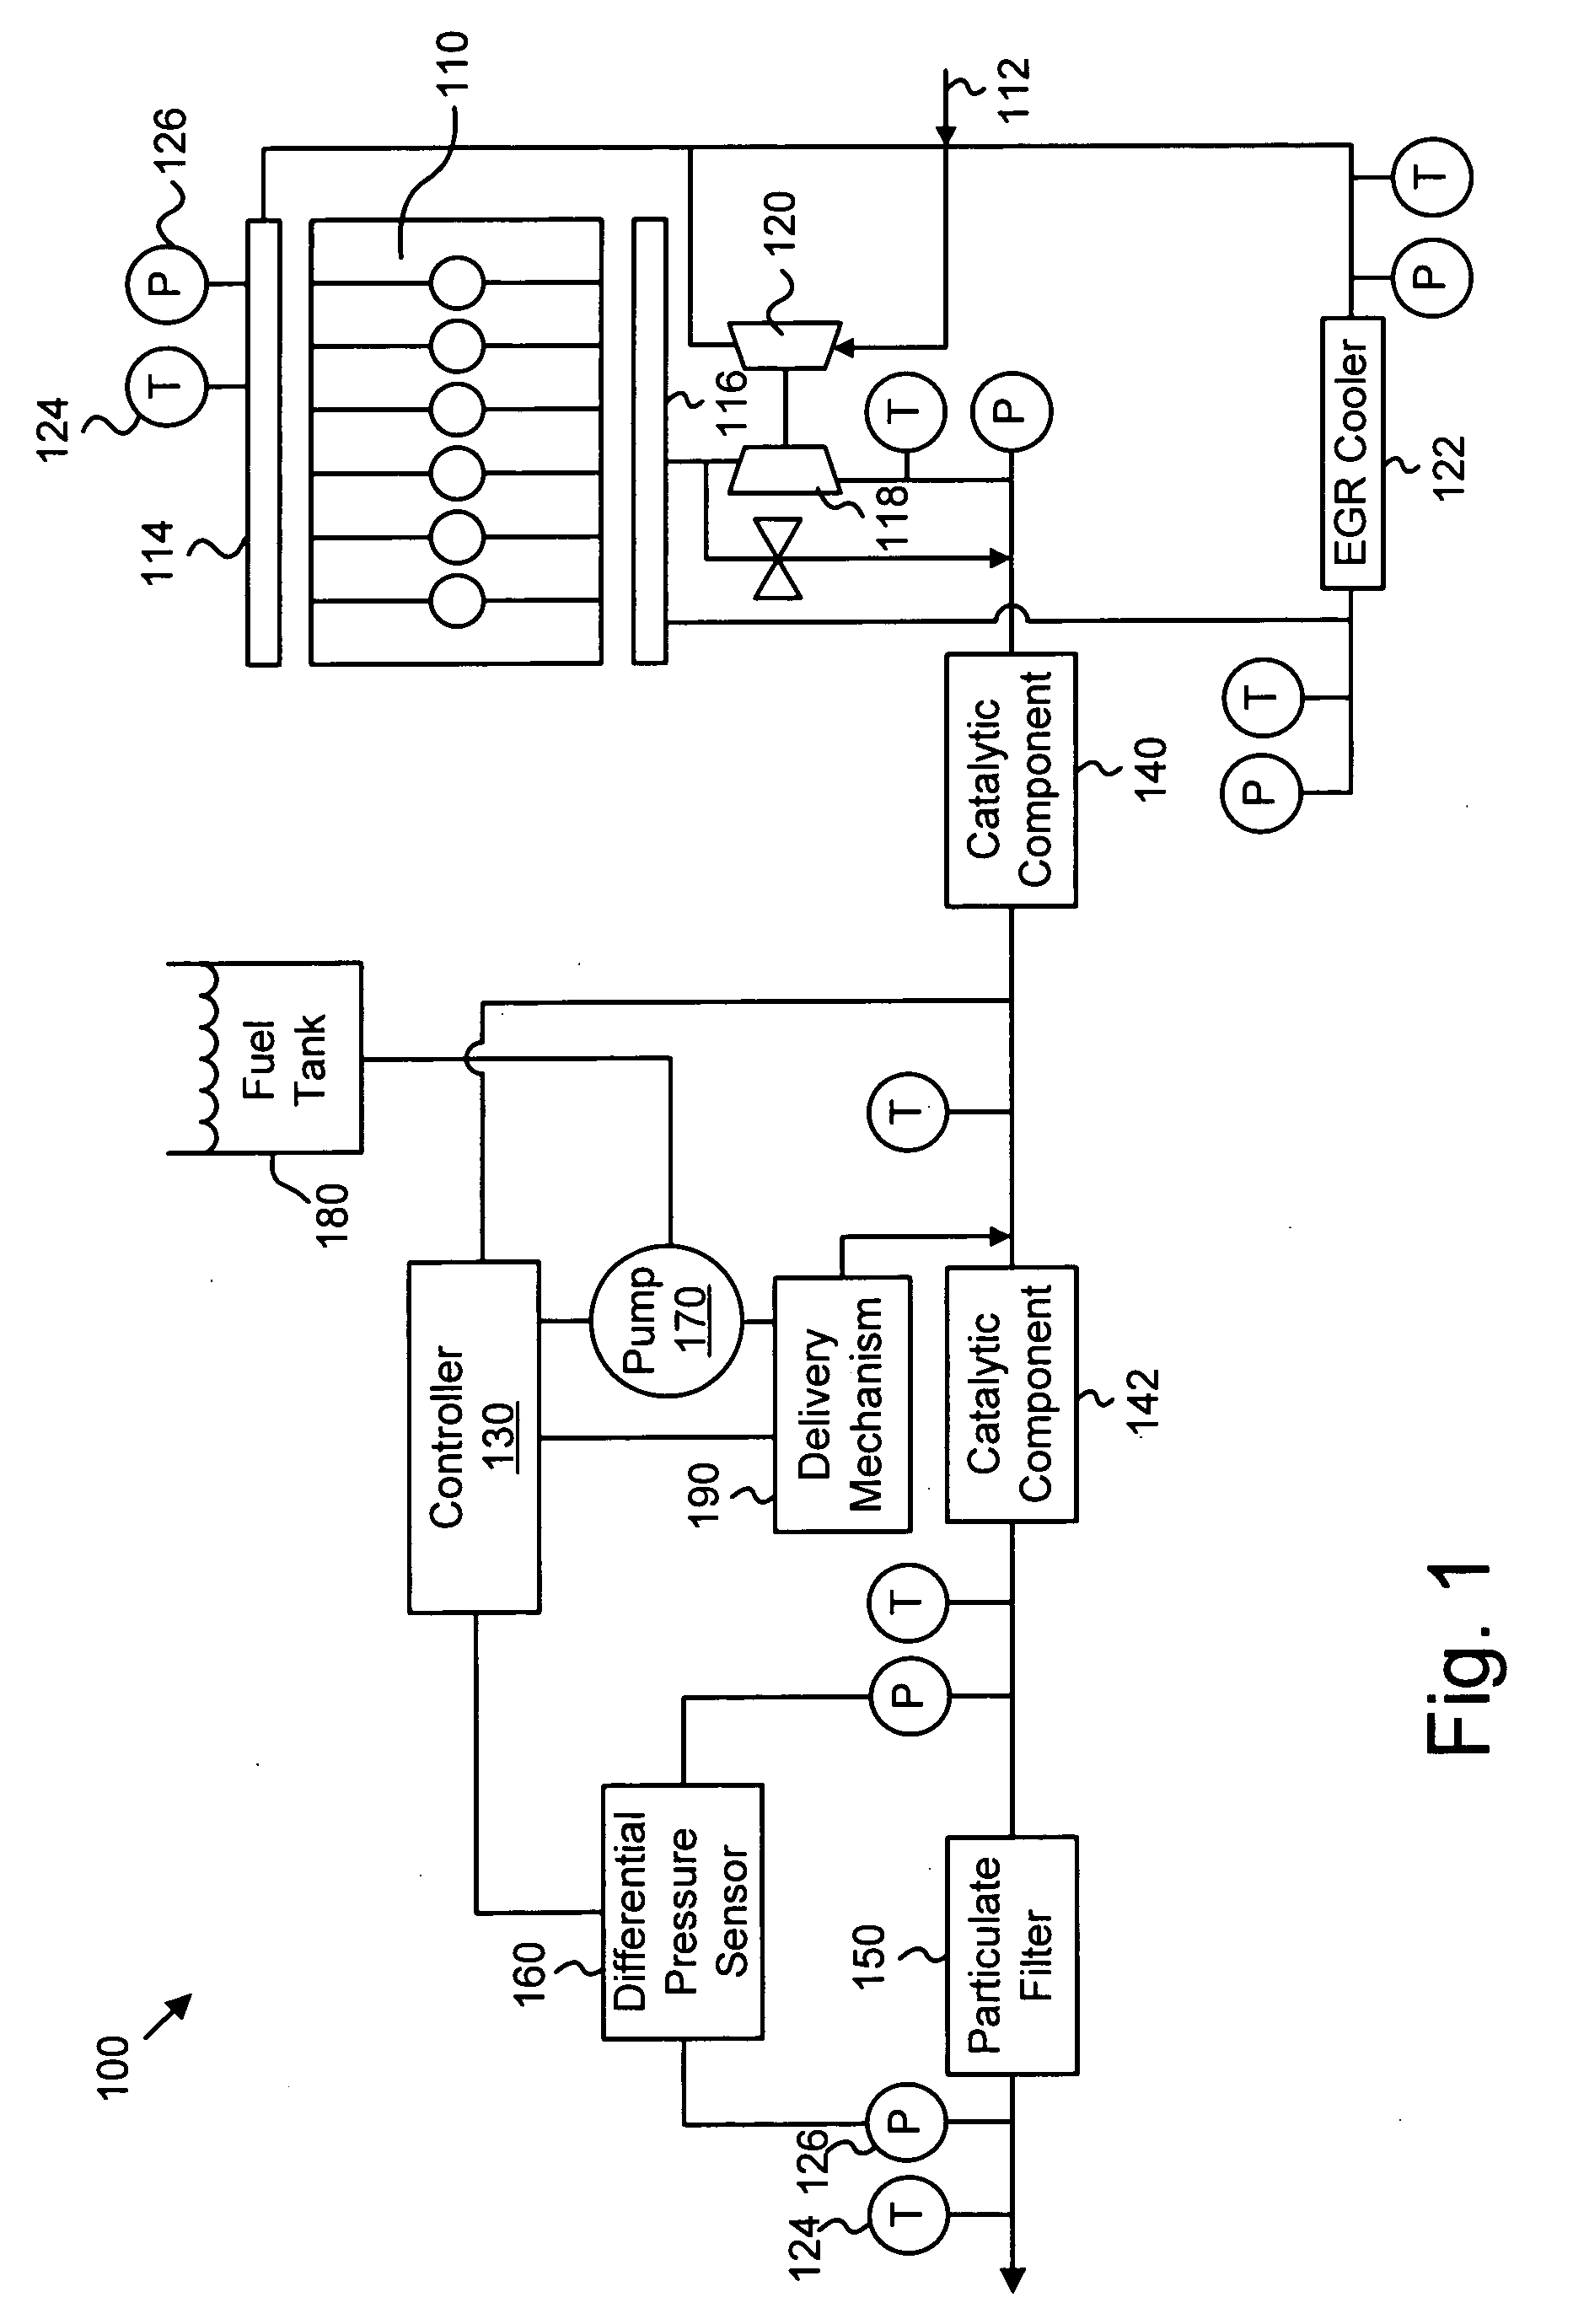 Apparatus, system, and method for determining the distribution of particulate matter on a particulate filter